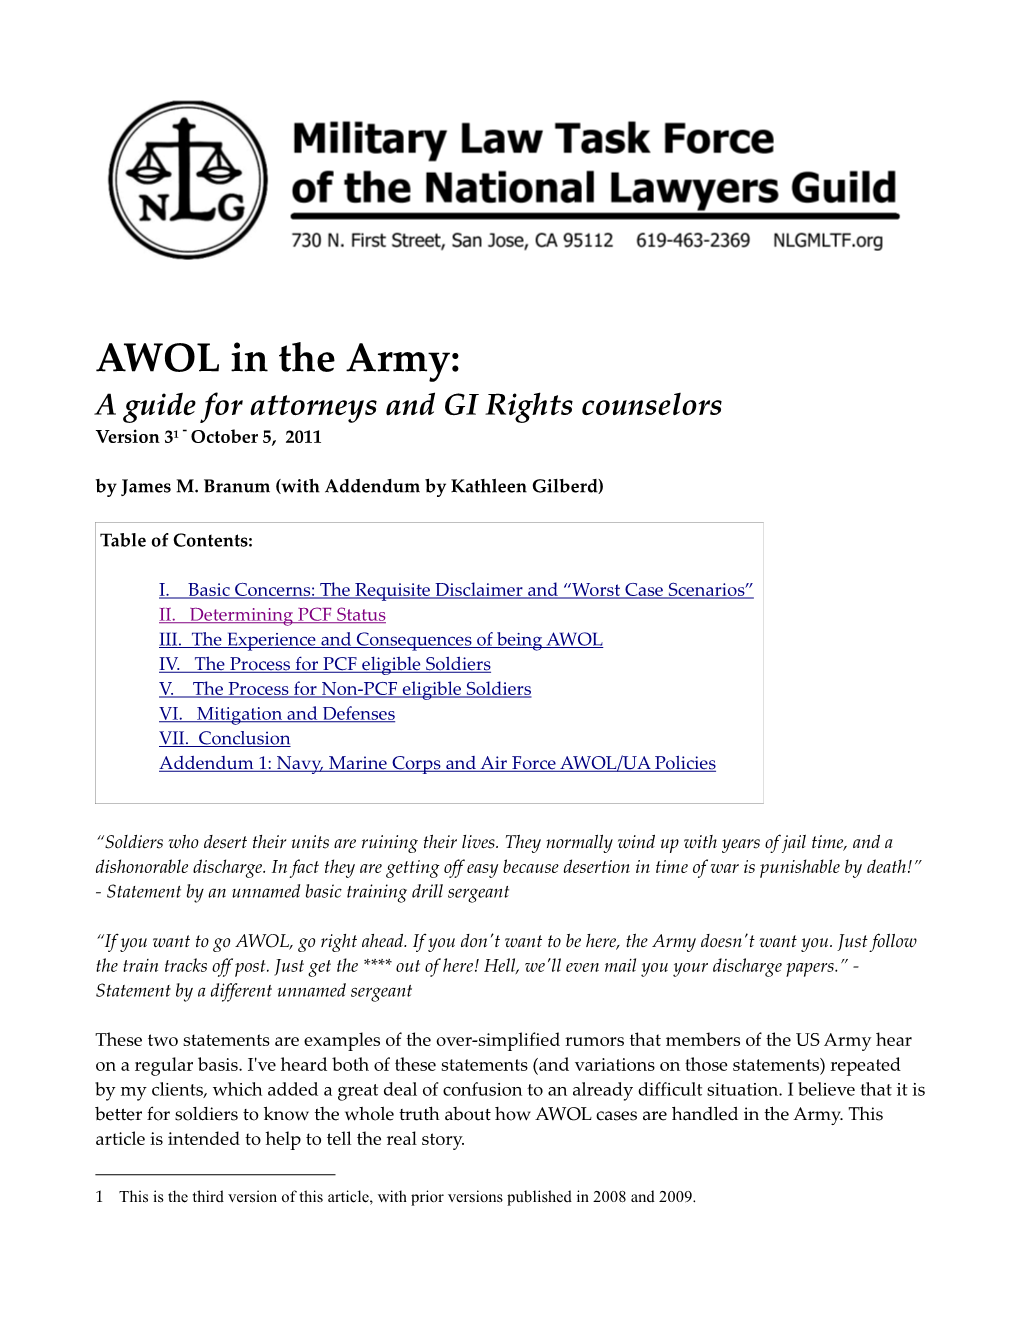 AWOL in the Army: a Guide for Attorneys and GI Rights Counselors Version 31 - October 5, 2011 by James M